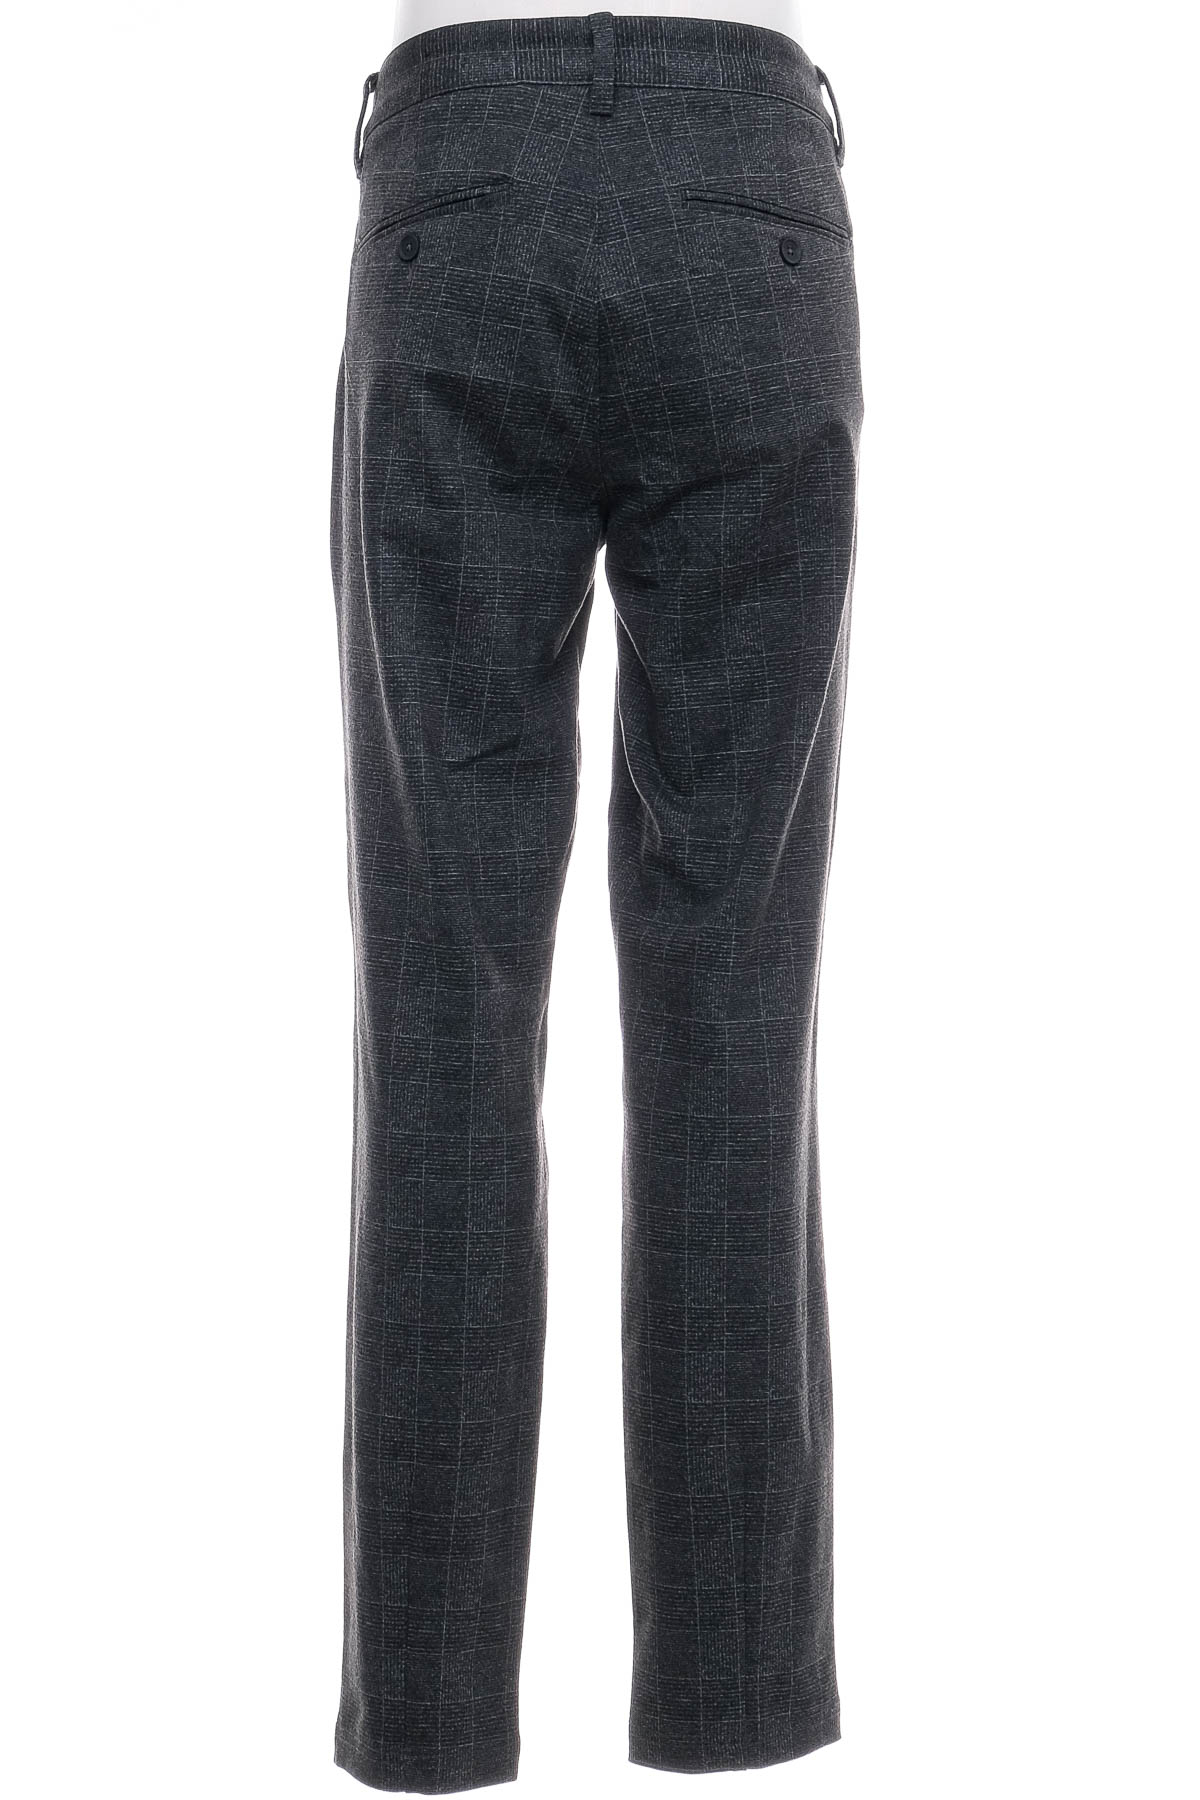 Men's trousers - ONLY & SONS - 1